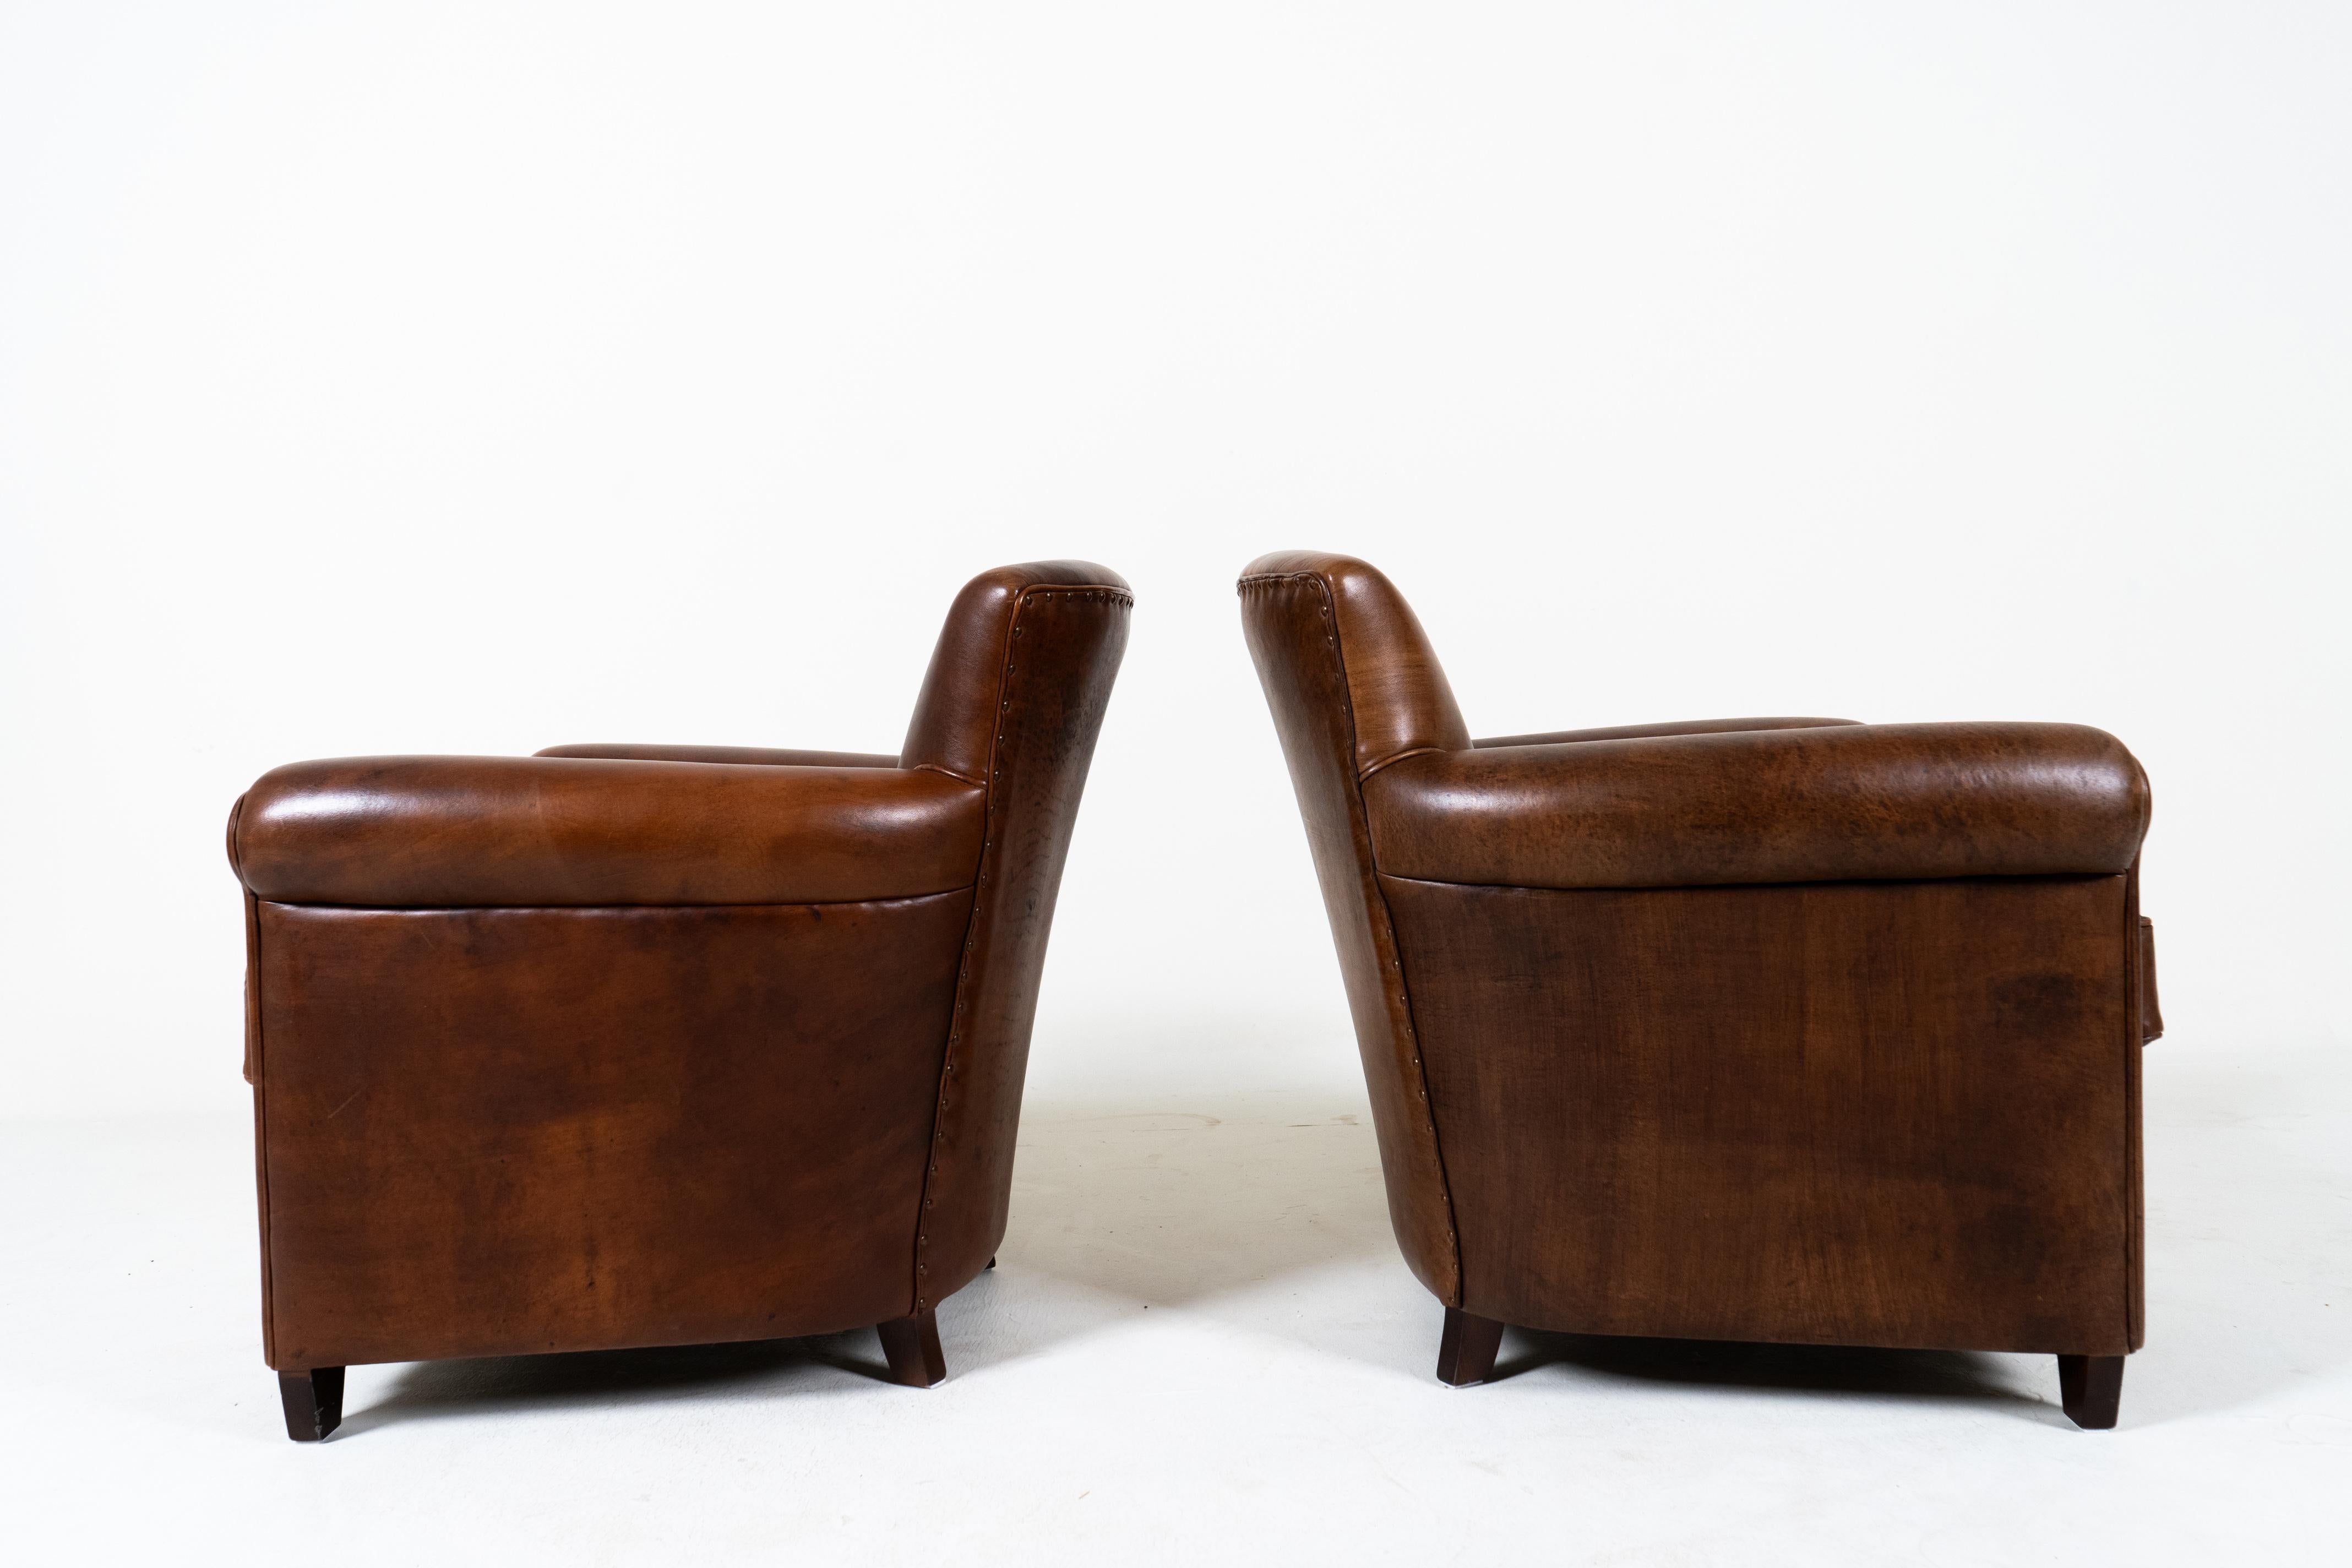 Contemporary A Pair of Lamb Leather Chairs, France Newly Made For Sale